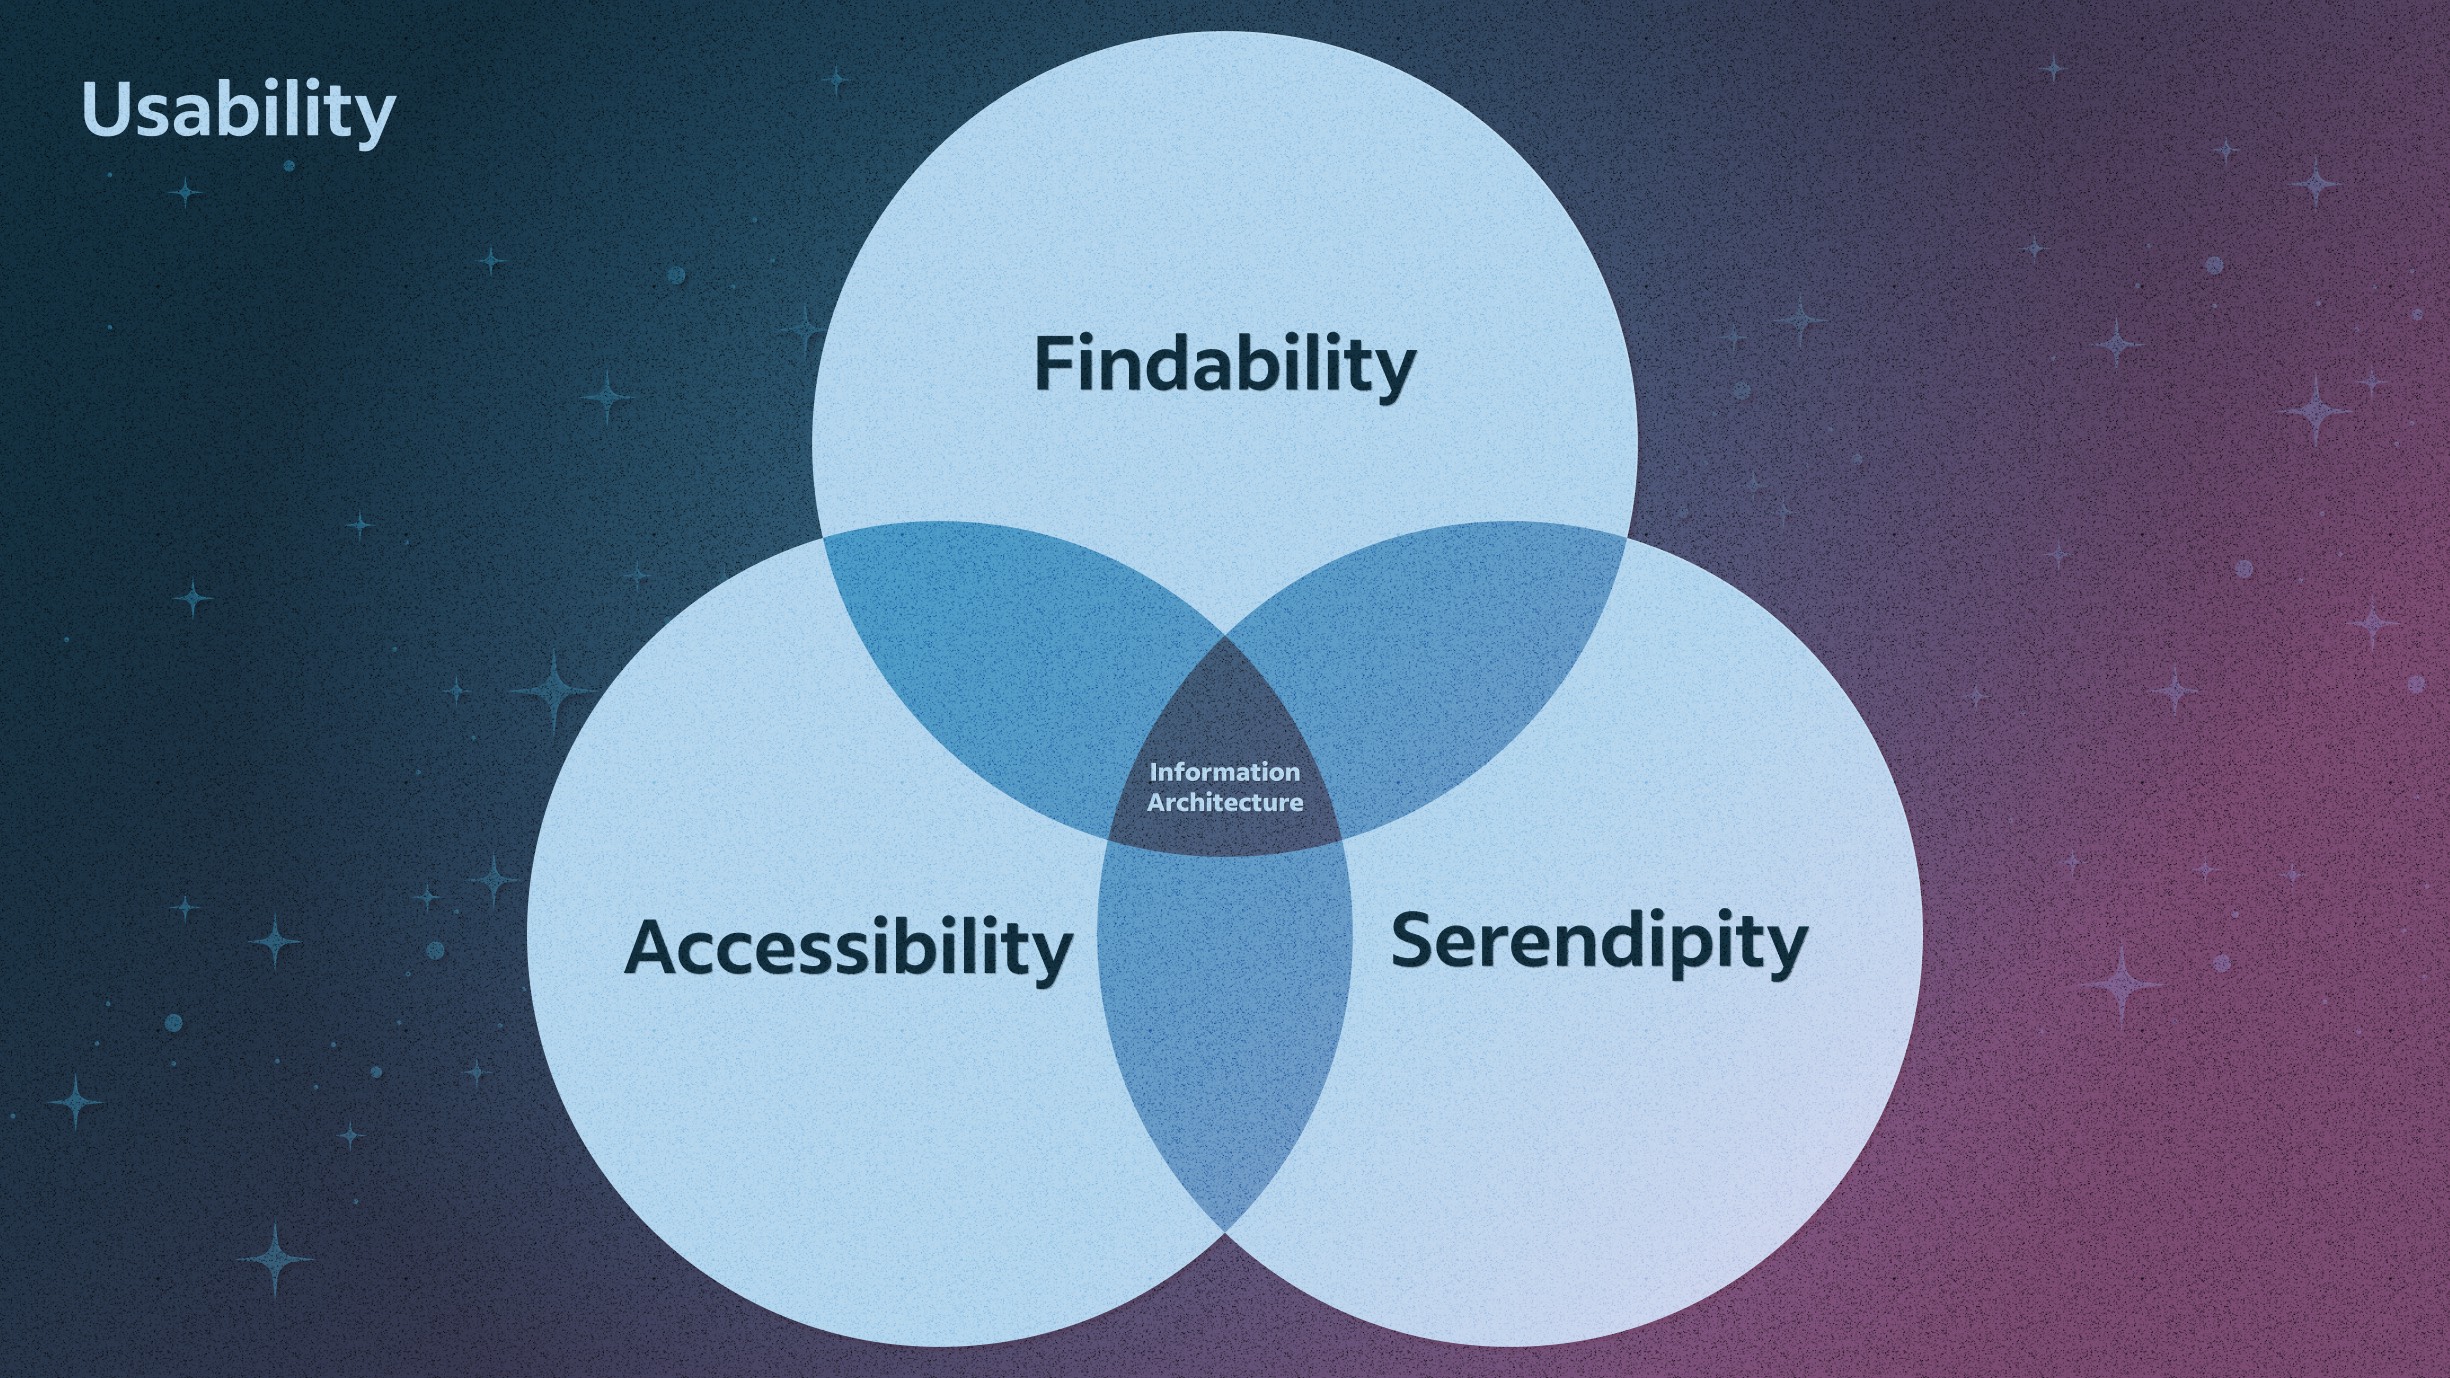 A diagram labeled "Usability" shows "Information architecture" at the center of three intersecting circles, which read "Findability," "Accessibility," and "Serendipity." 